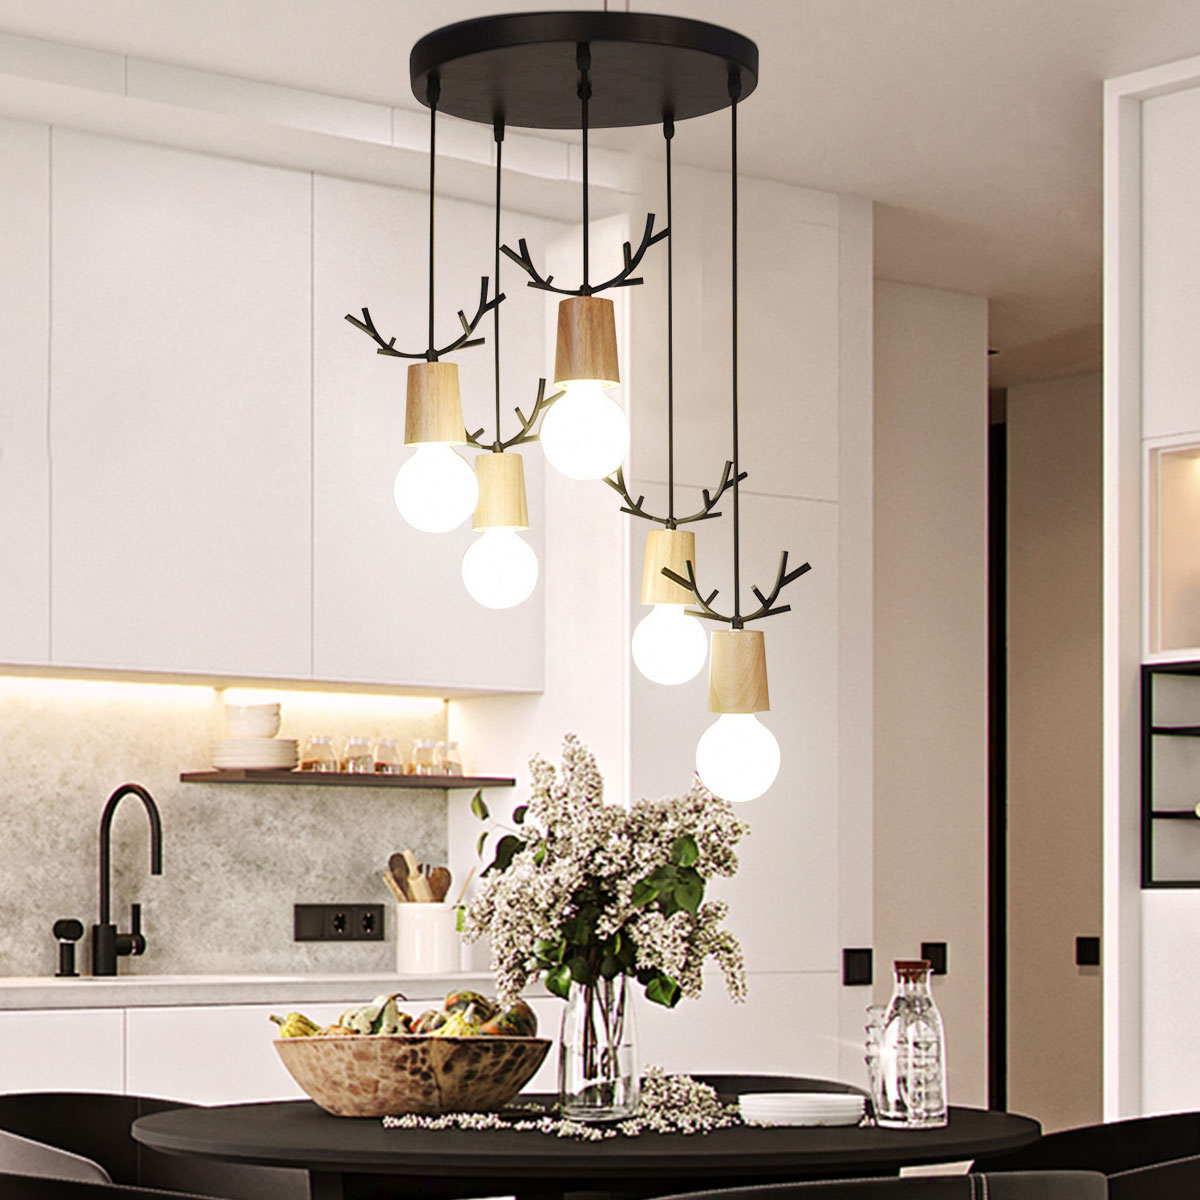 Modern 3-Lights Kitchen Island Chandelier Triple 3 Heads Pendant Hanging Ceiling Lighting Fixture with LED Antler Decorative Shade - image 1 of 9